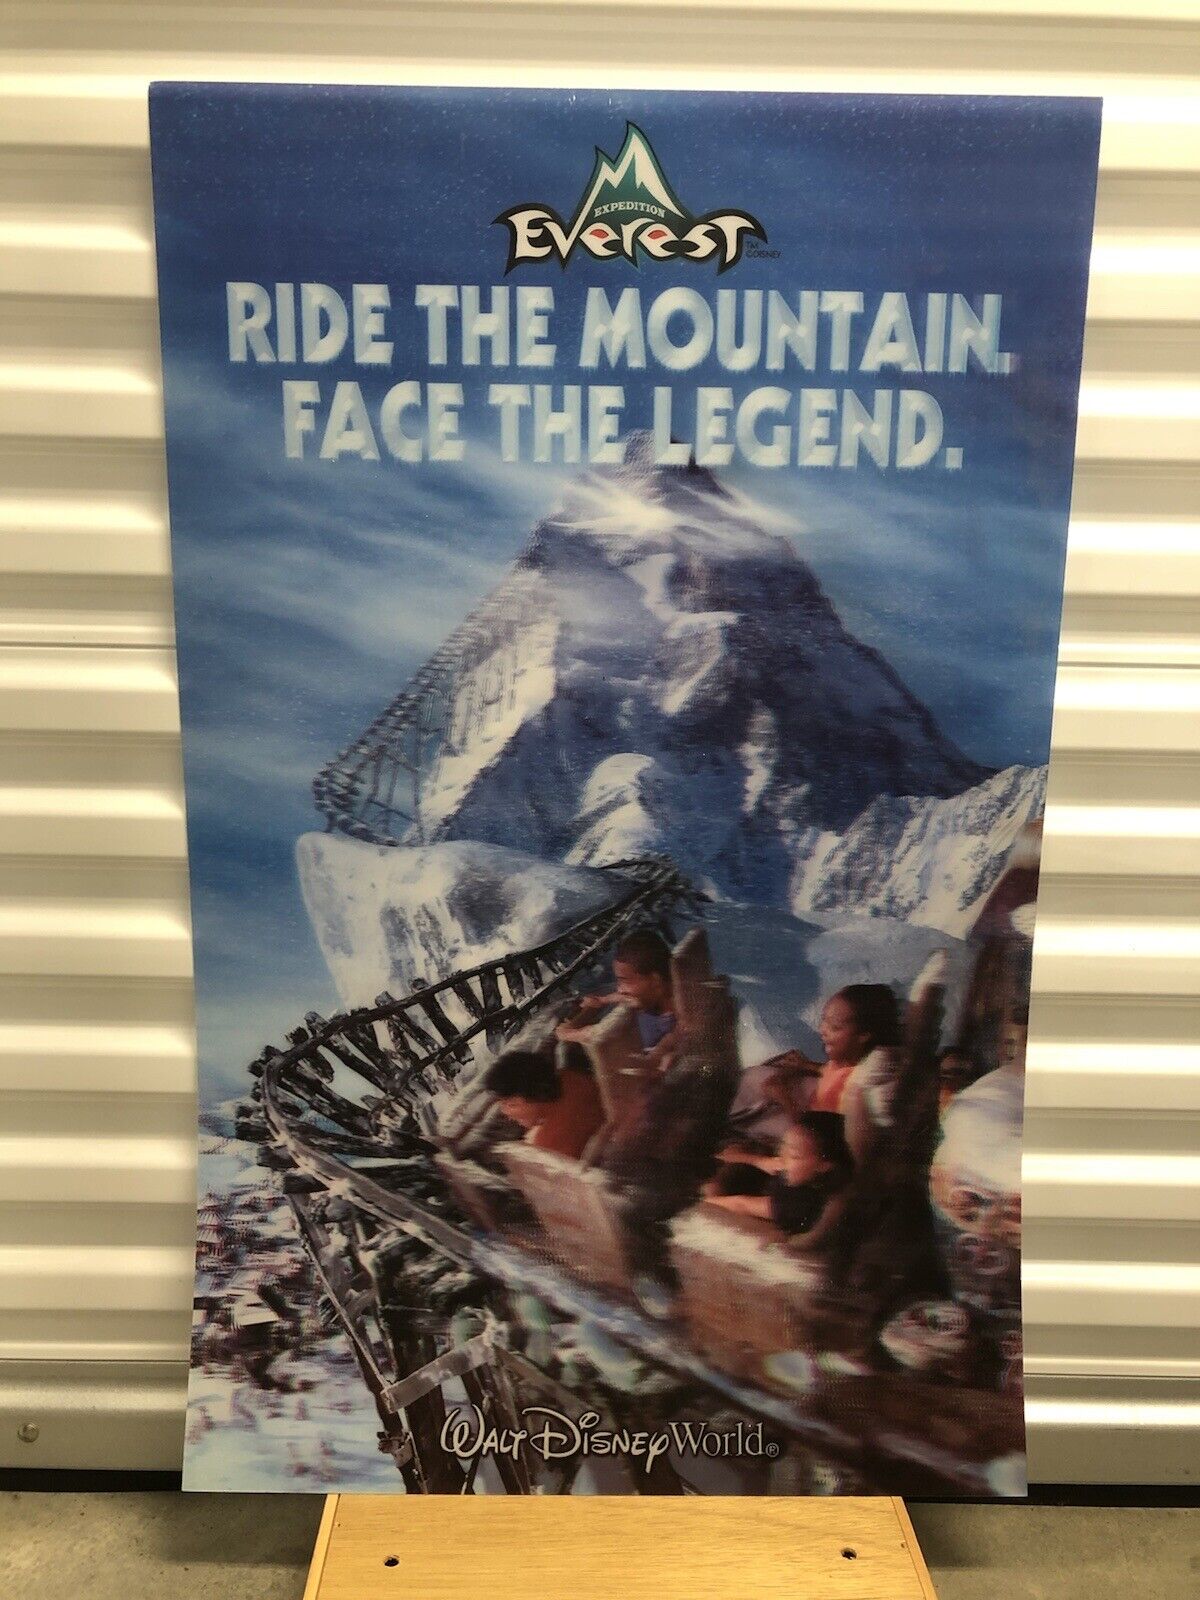 3D Poster Disney World Expedition Everest Roller Coaster Poster 5x22 rare 